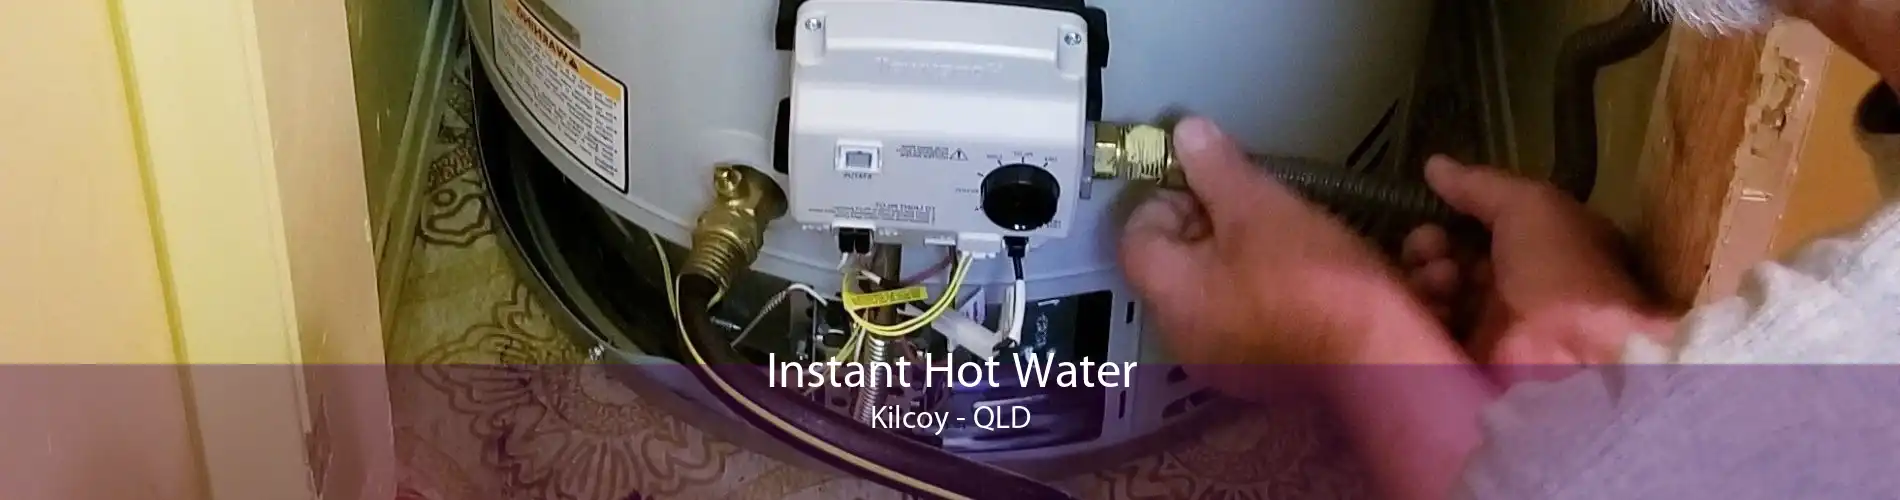 Instant Hot Water Kilcoy - QLD